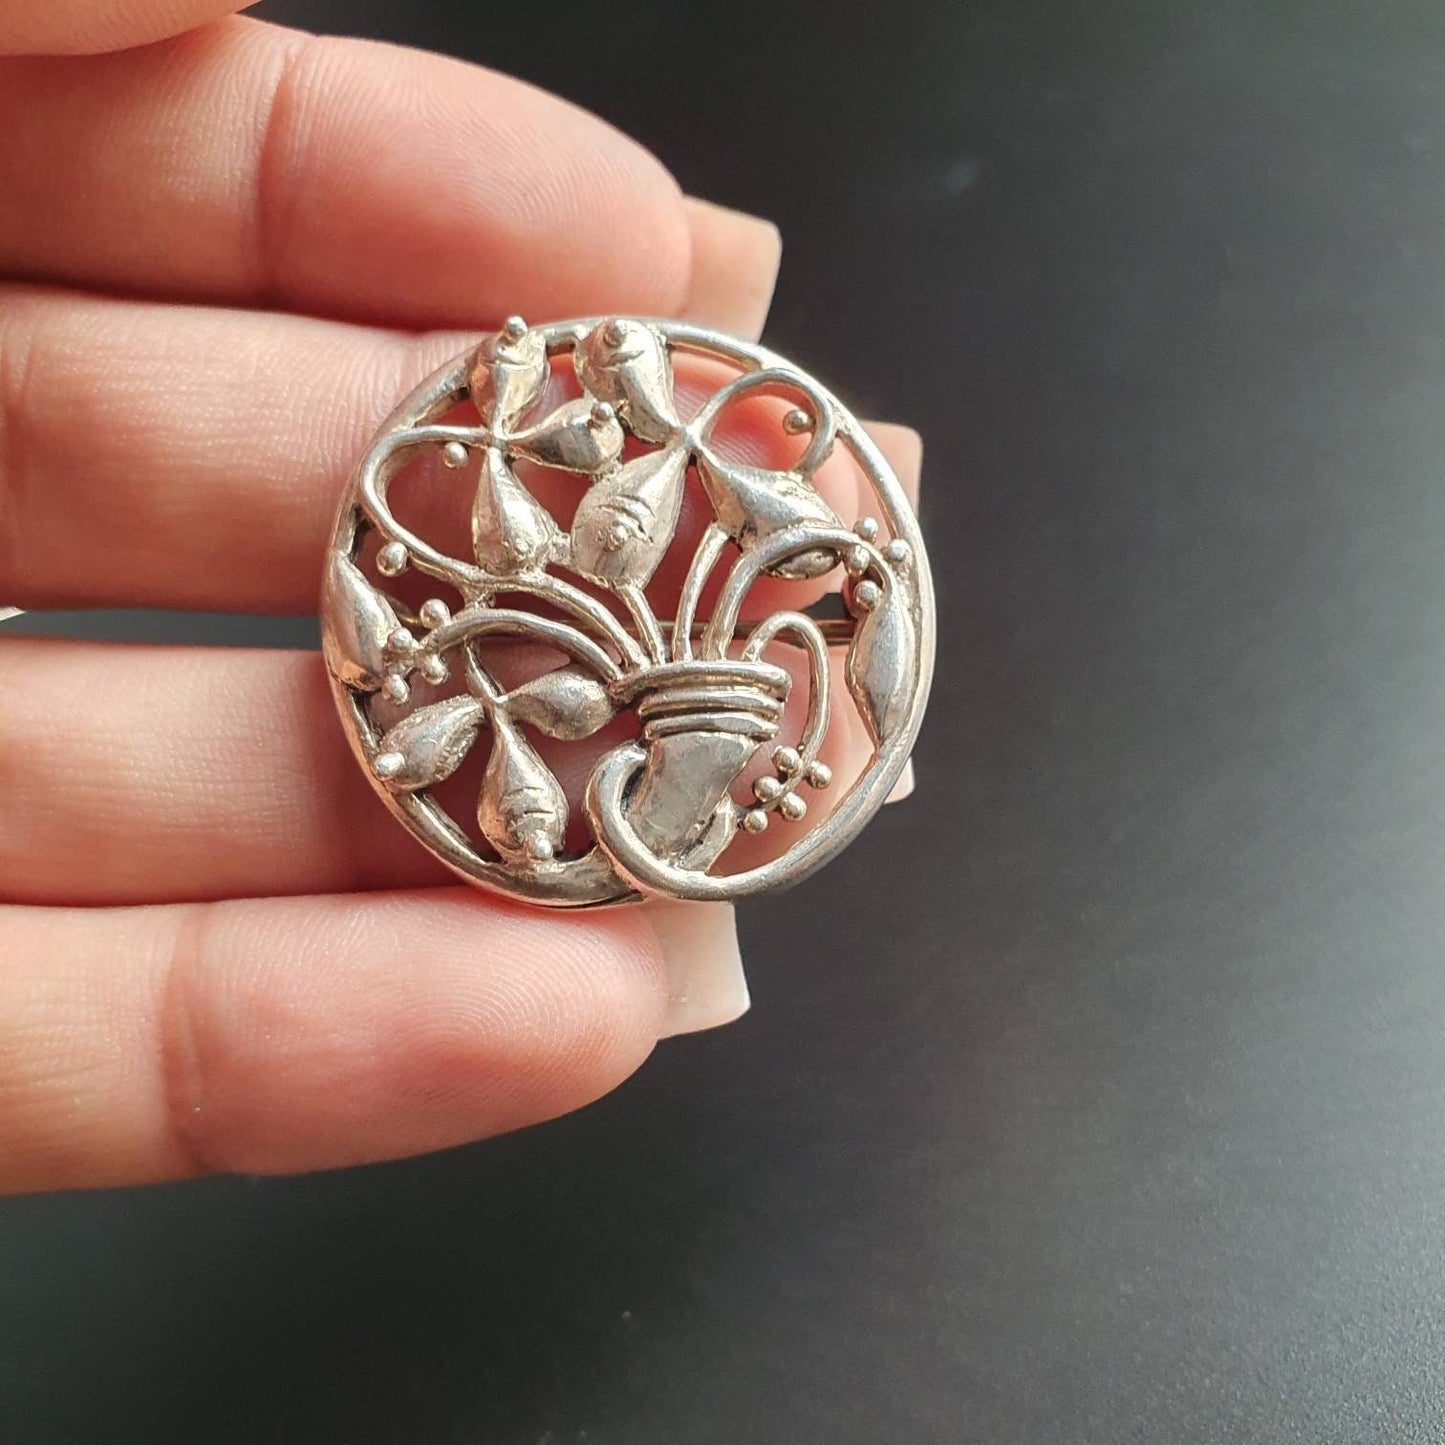 sterling silver, brooches, vintage, handmade, jewelry, gifts, dress, brooch, floral, filigree,joblot, bundle, antique, clothes jewelry